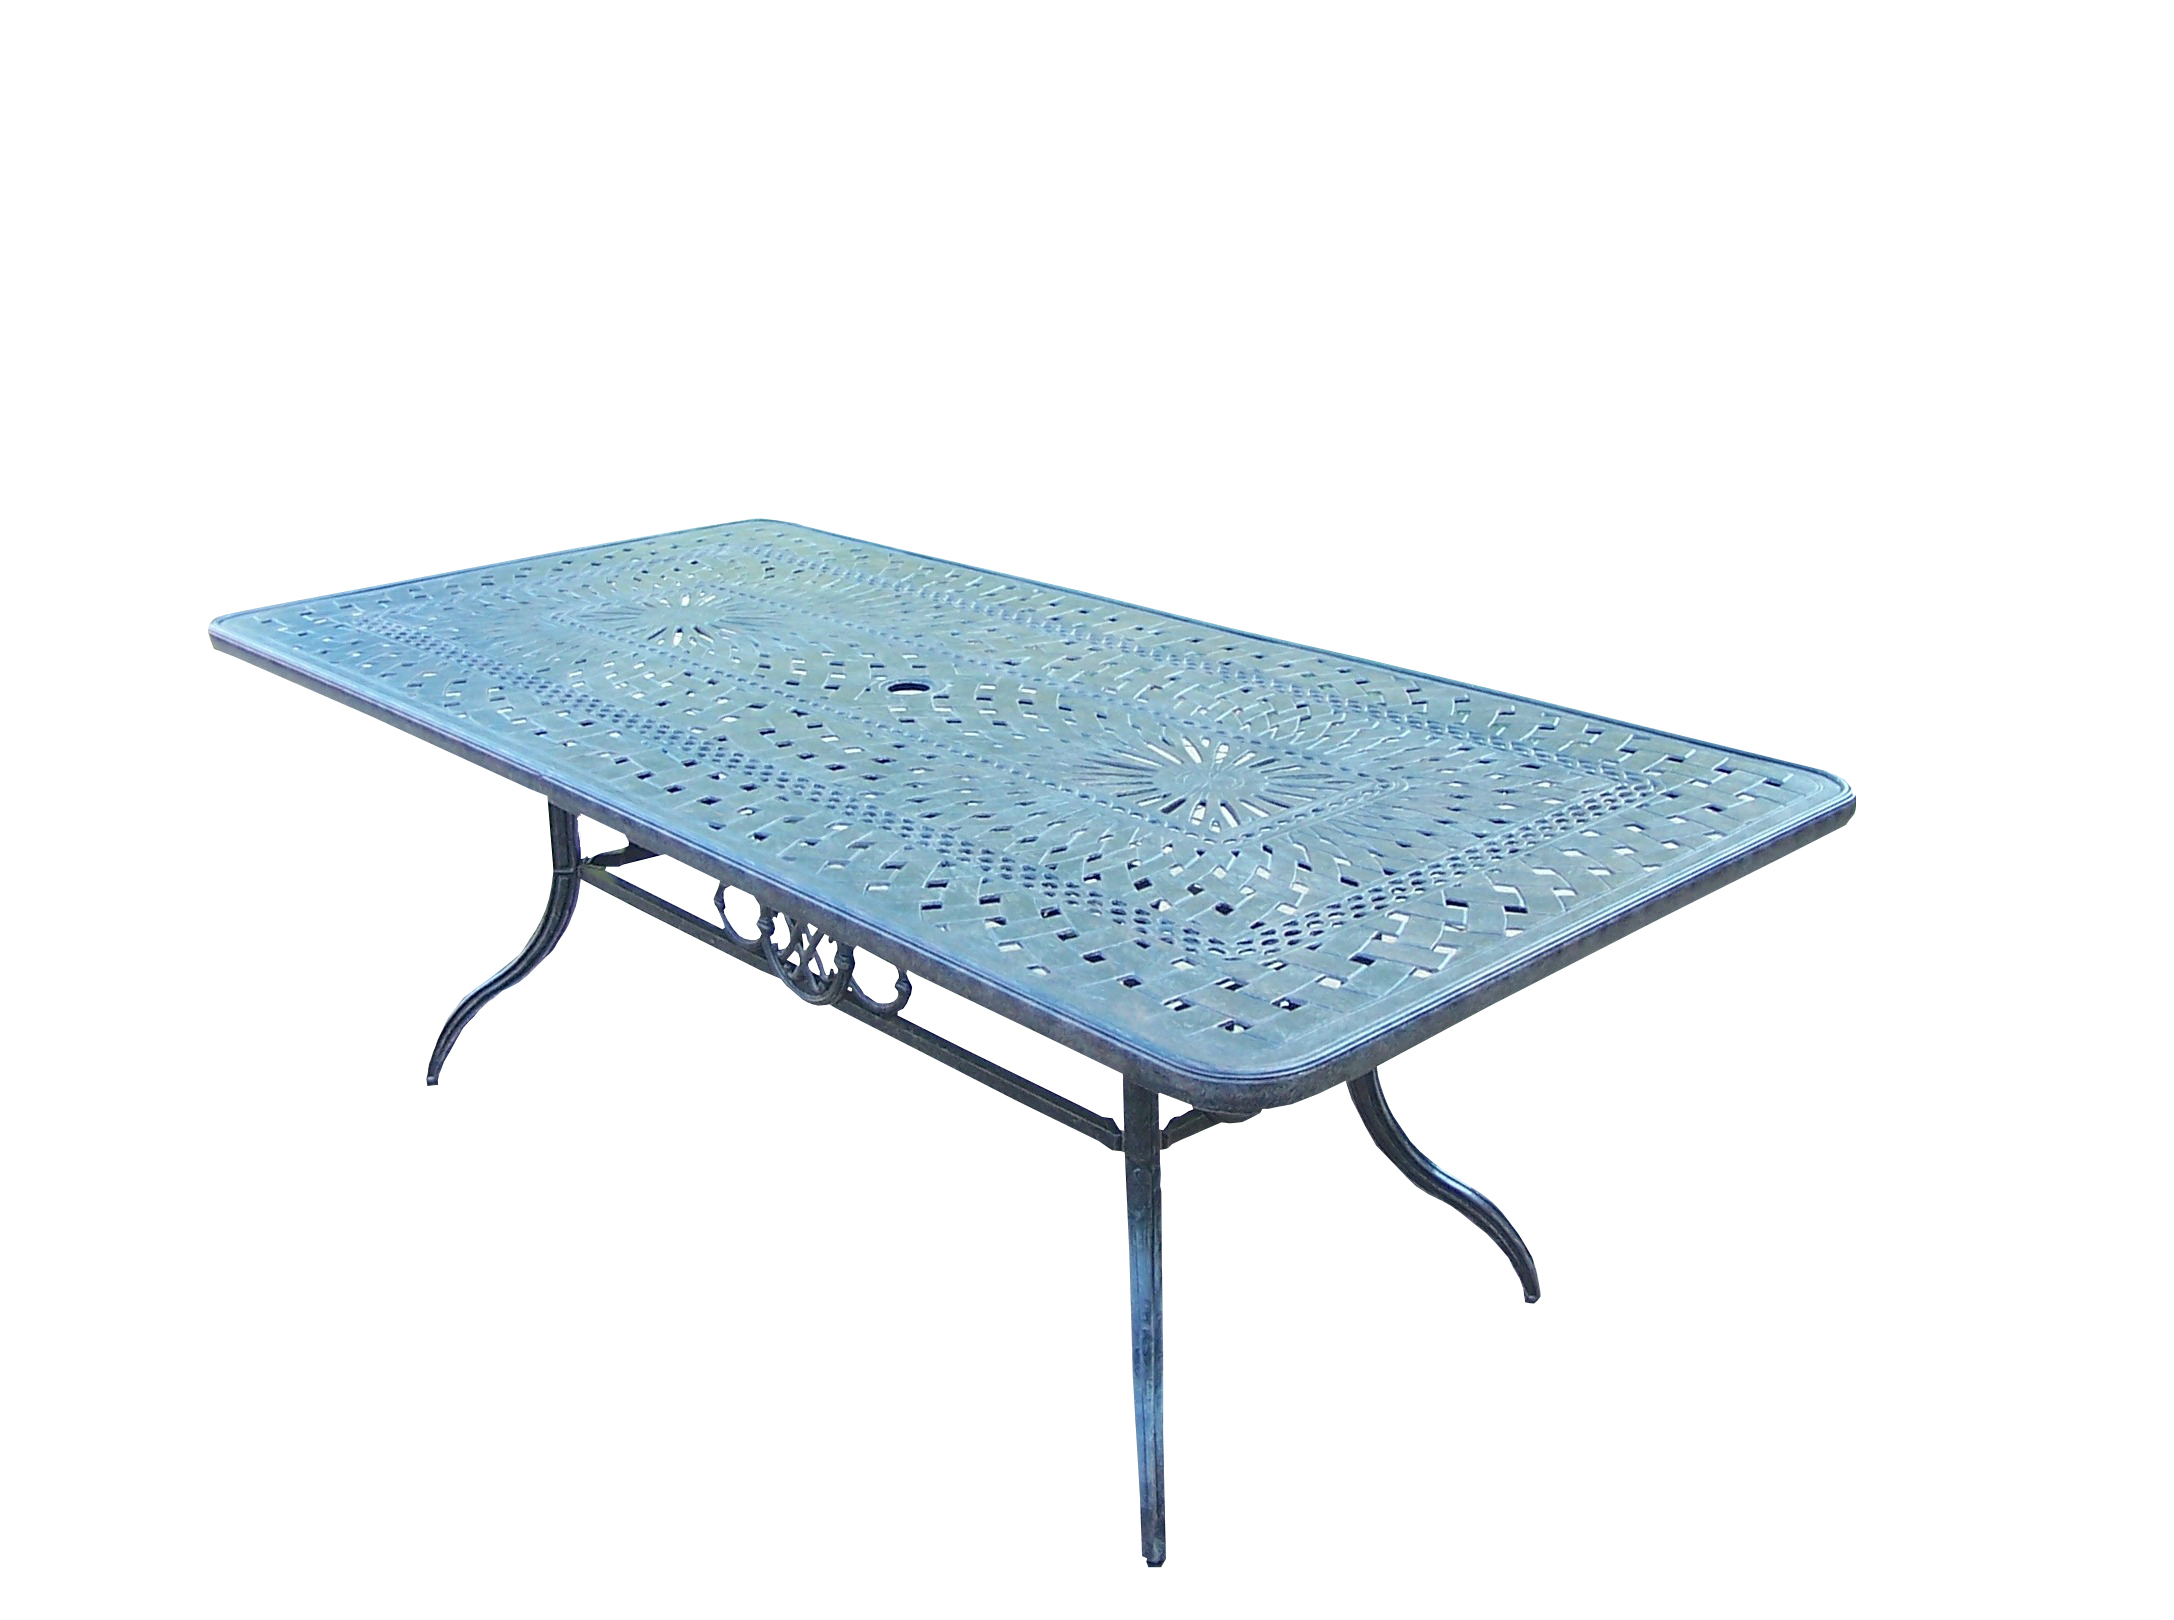 Oakland Living 84 x 42-inch Aluminum Rectangular Dining Table w/ umbrella hole in the center